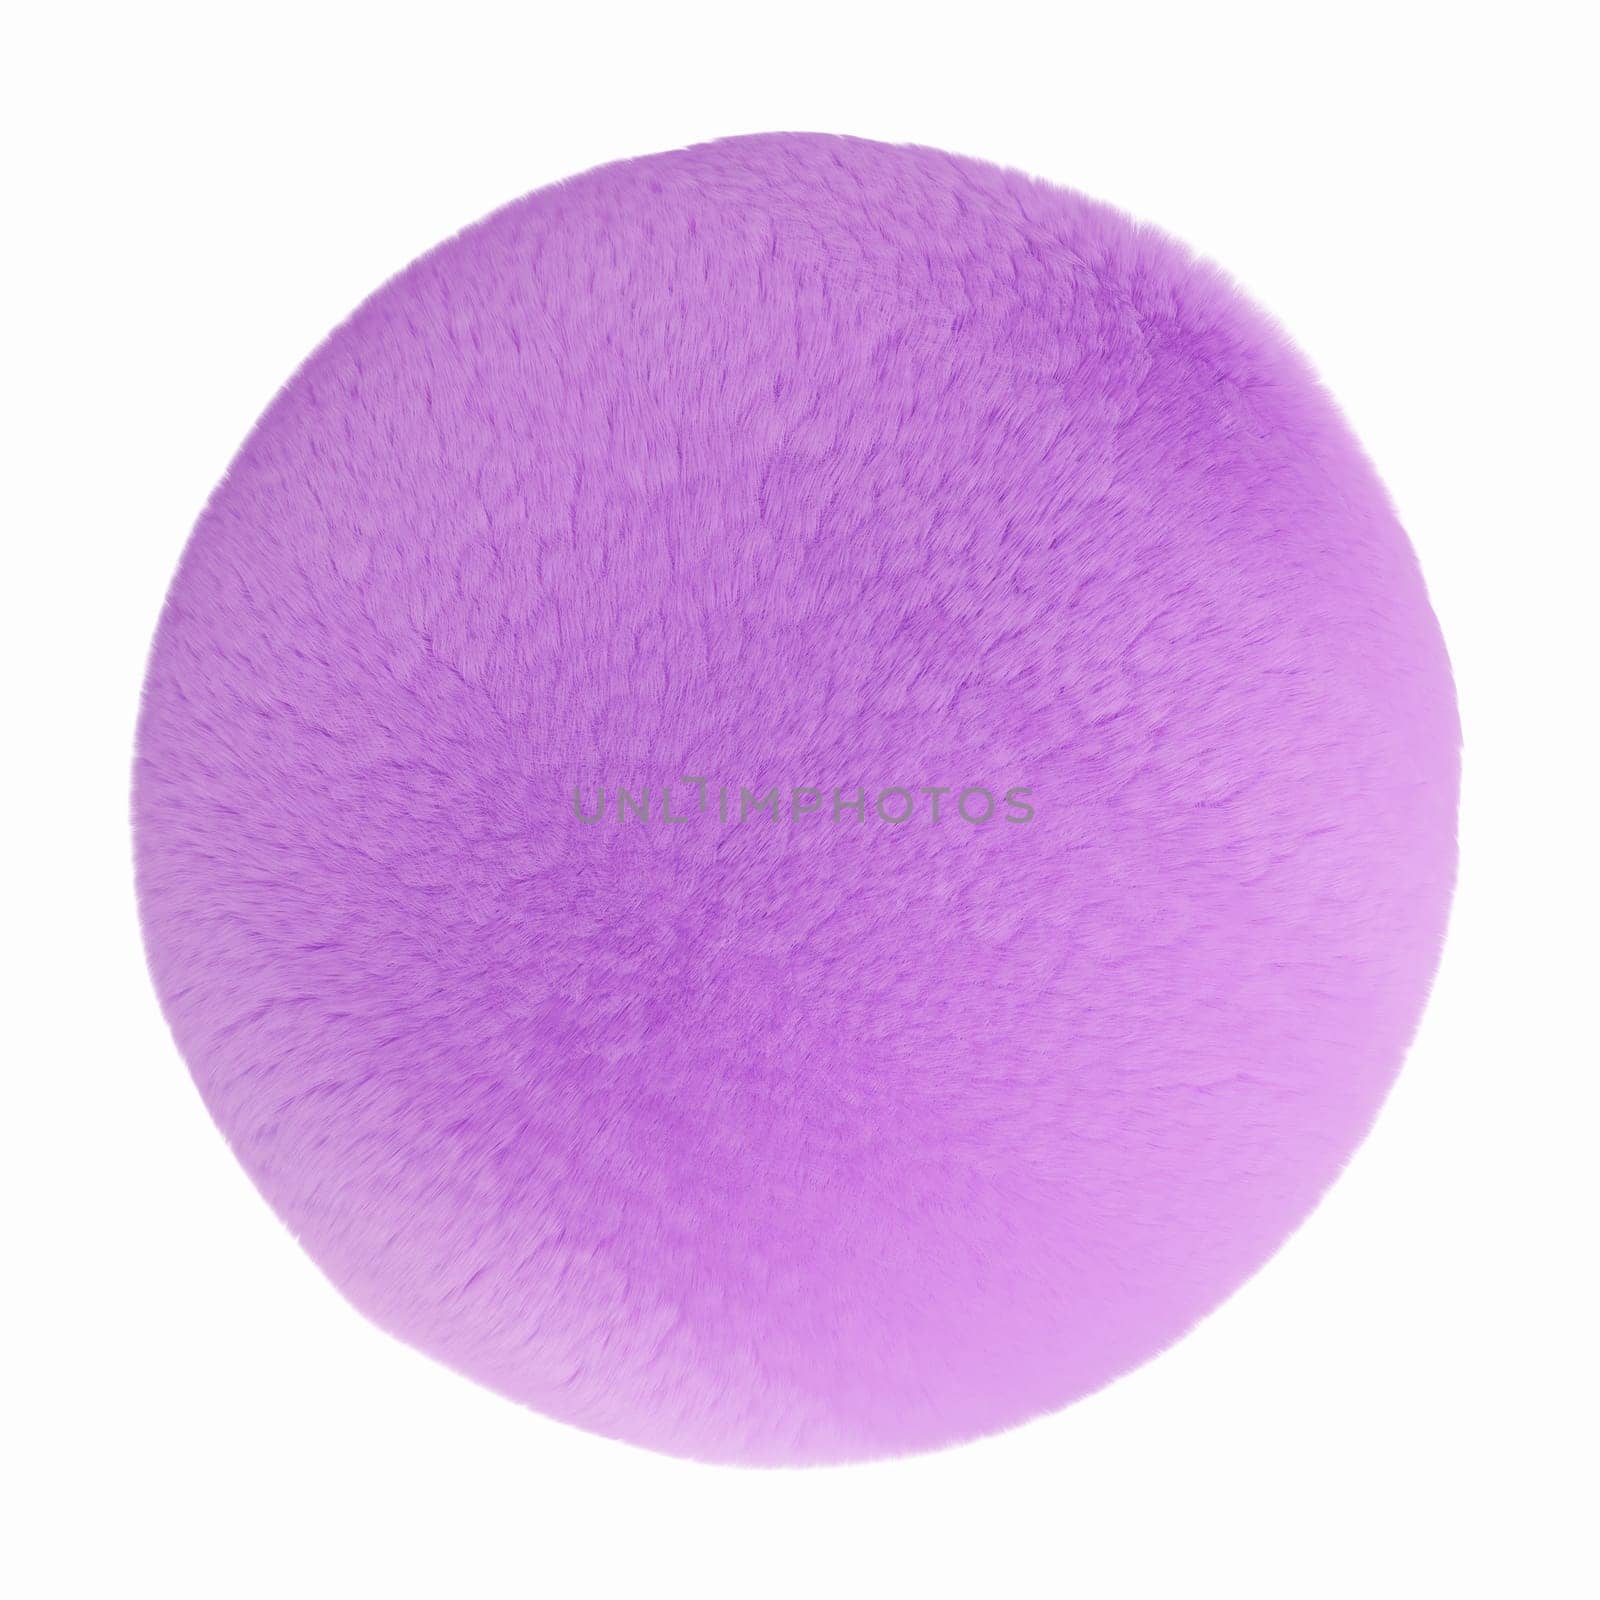 Fluffy purple 3D geometric shape, isolated on white background. Furry, soft and hairy sphere. Trendy, cute design element. Cut out object. 3D rendering. by creativebird